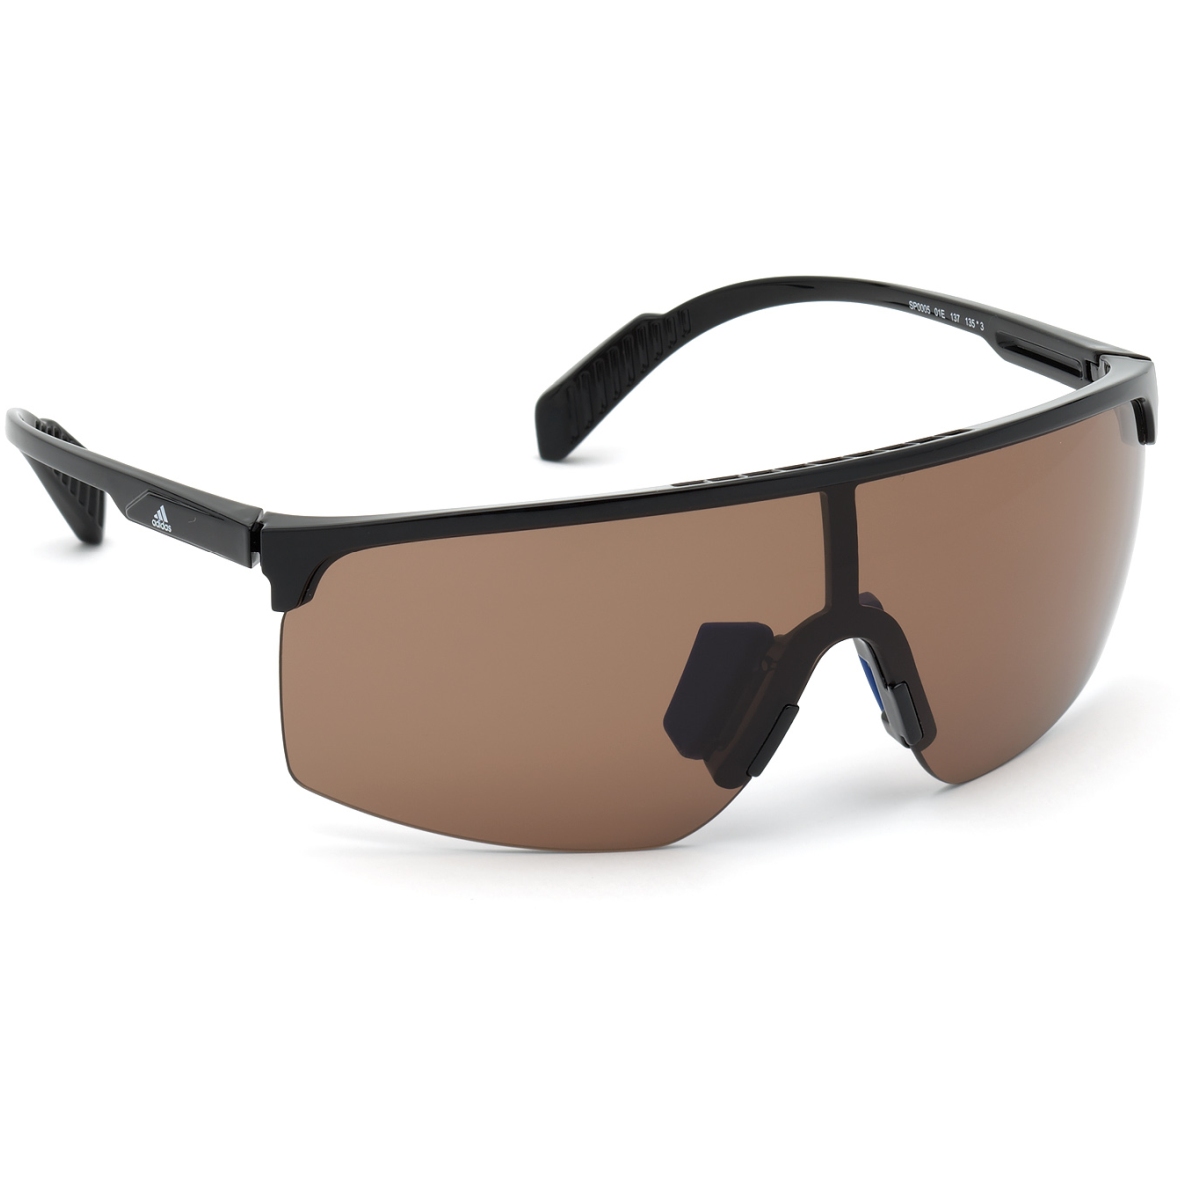 Picture of adidas Sp0005 Injected Sports Sunglasses - Shiny Black / Contrast Brown